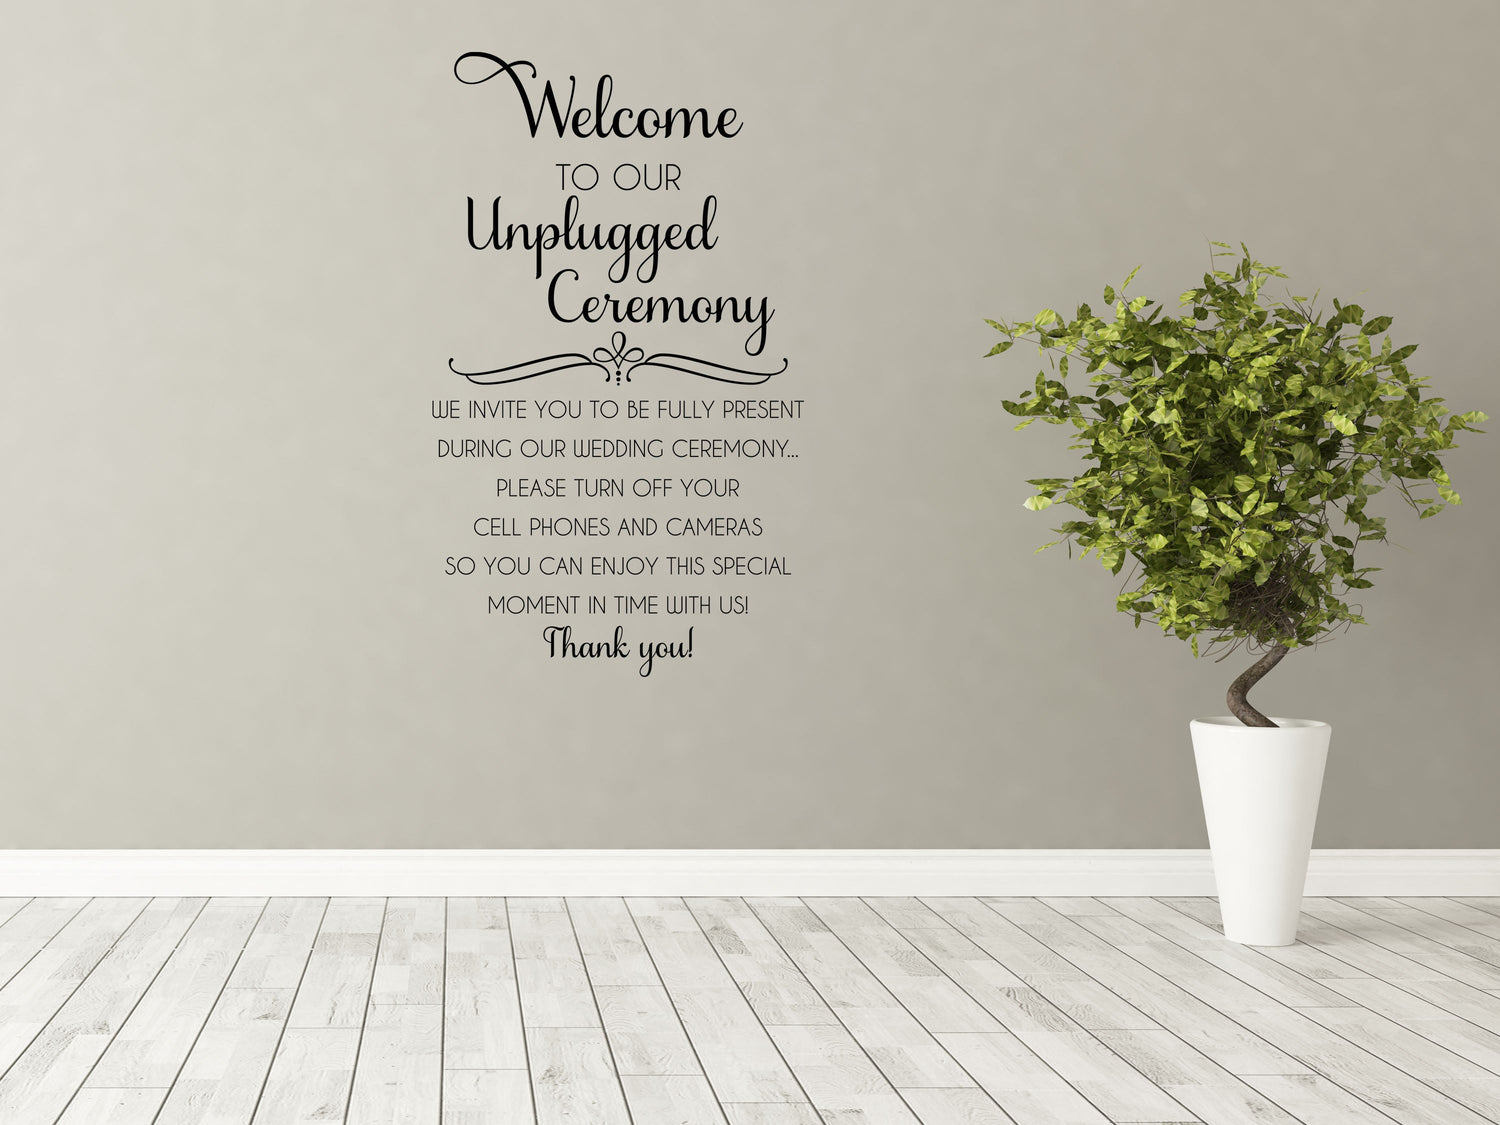 Unplugged Wedding - Inspirational Wall Decals Vinyl Wall Decal Done 